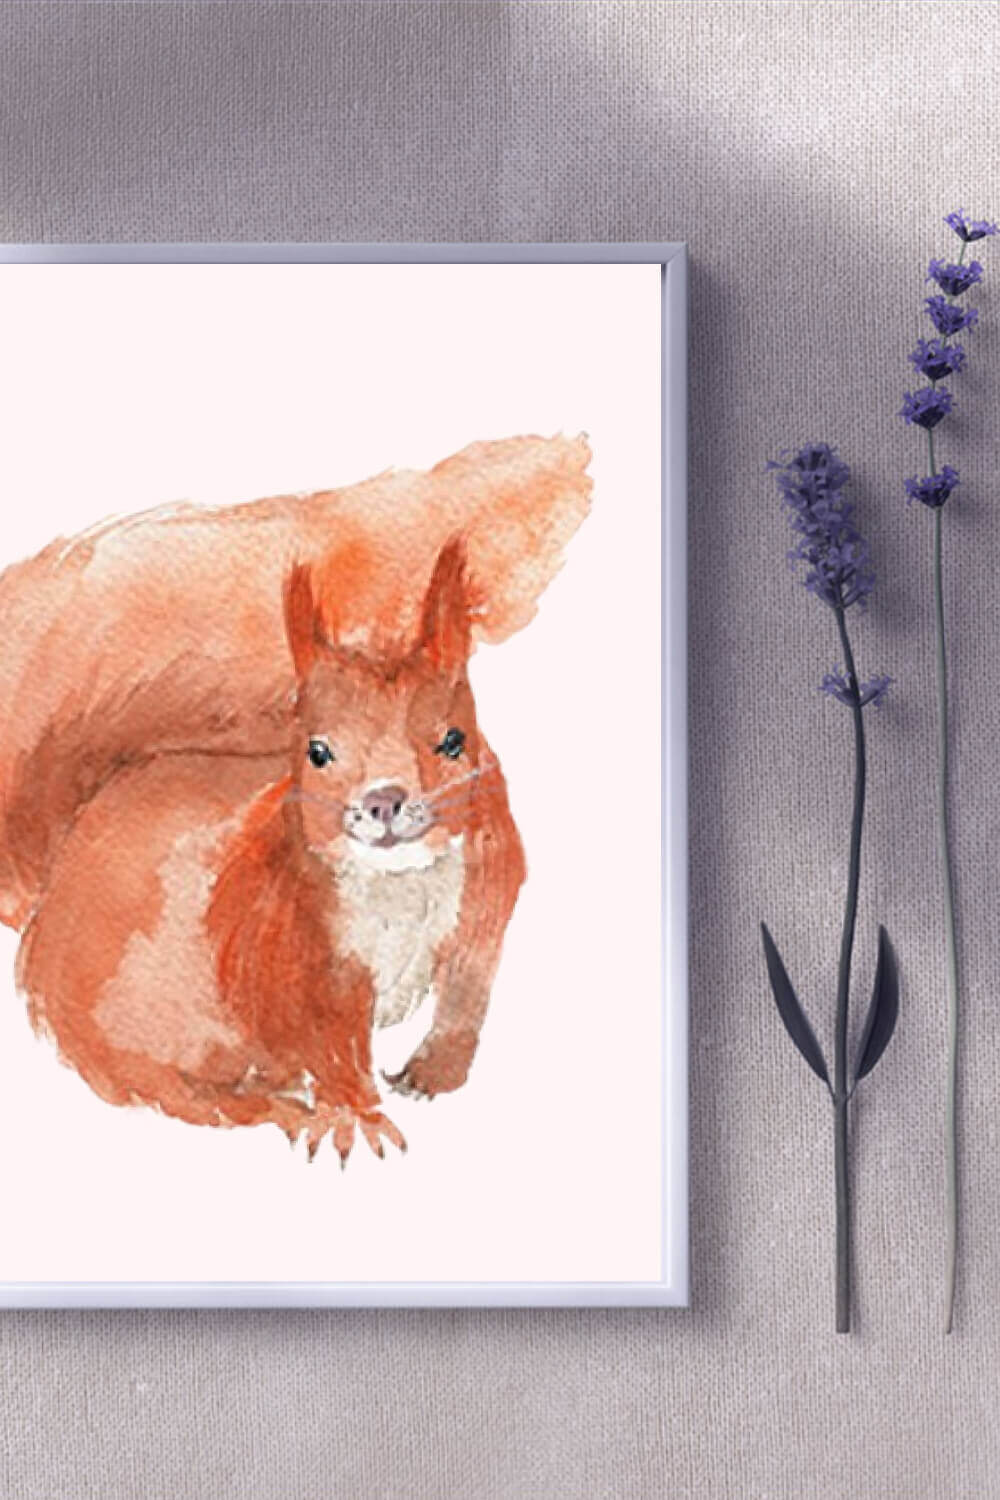 Red squirrel painted in watercolor on a painting with a white background.